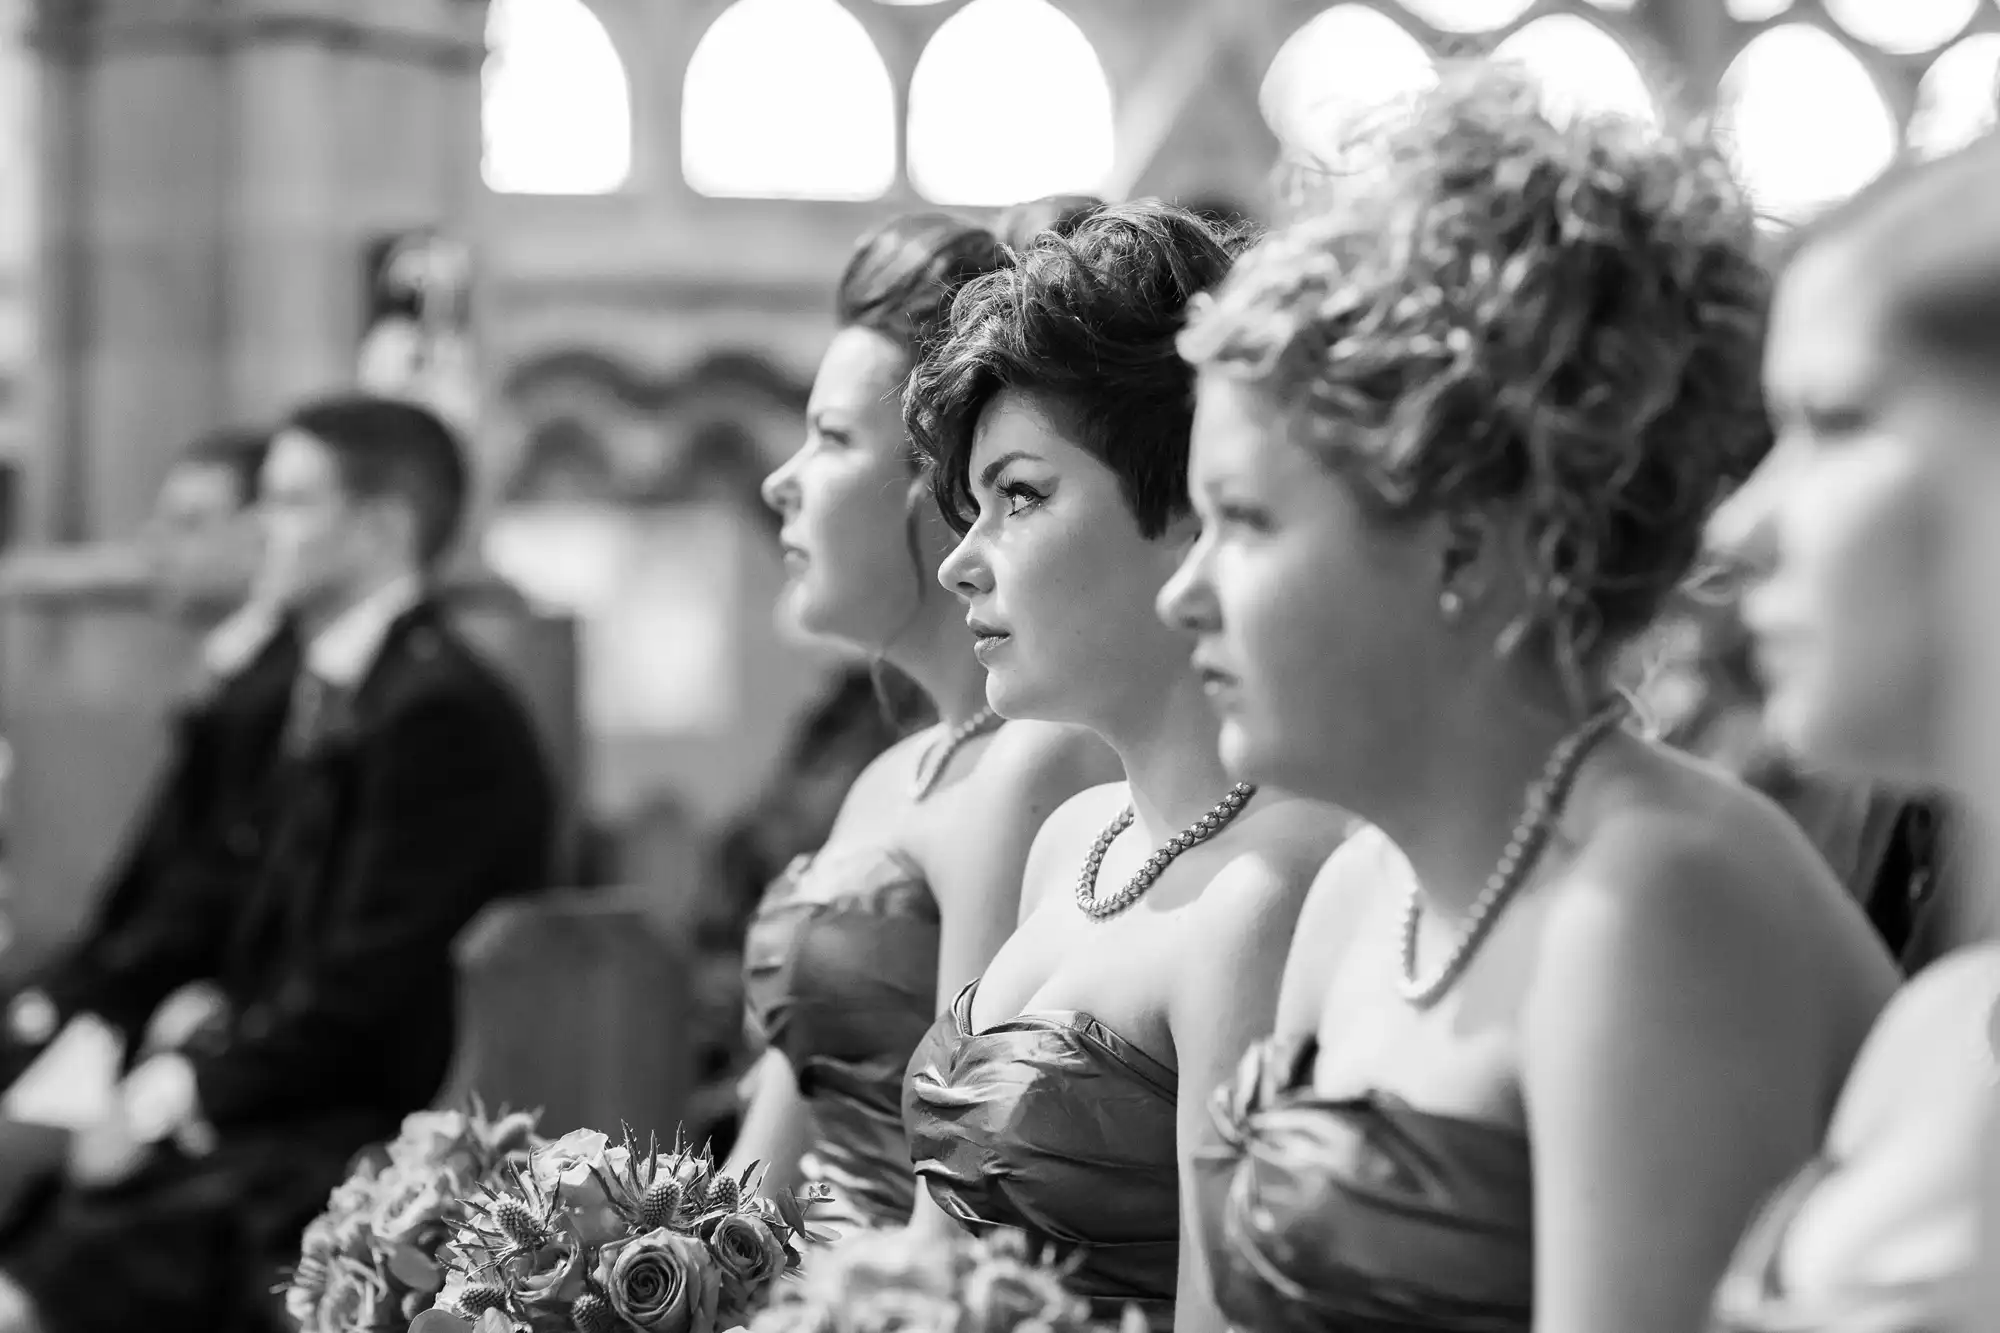 Black and white image of bridesmaids in elegant dresses, seated in a row at a wedding ceremony inside a church.